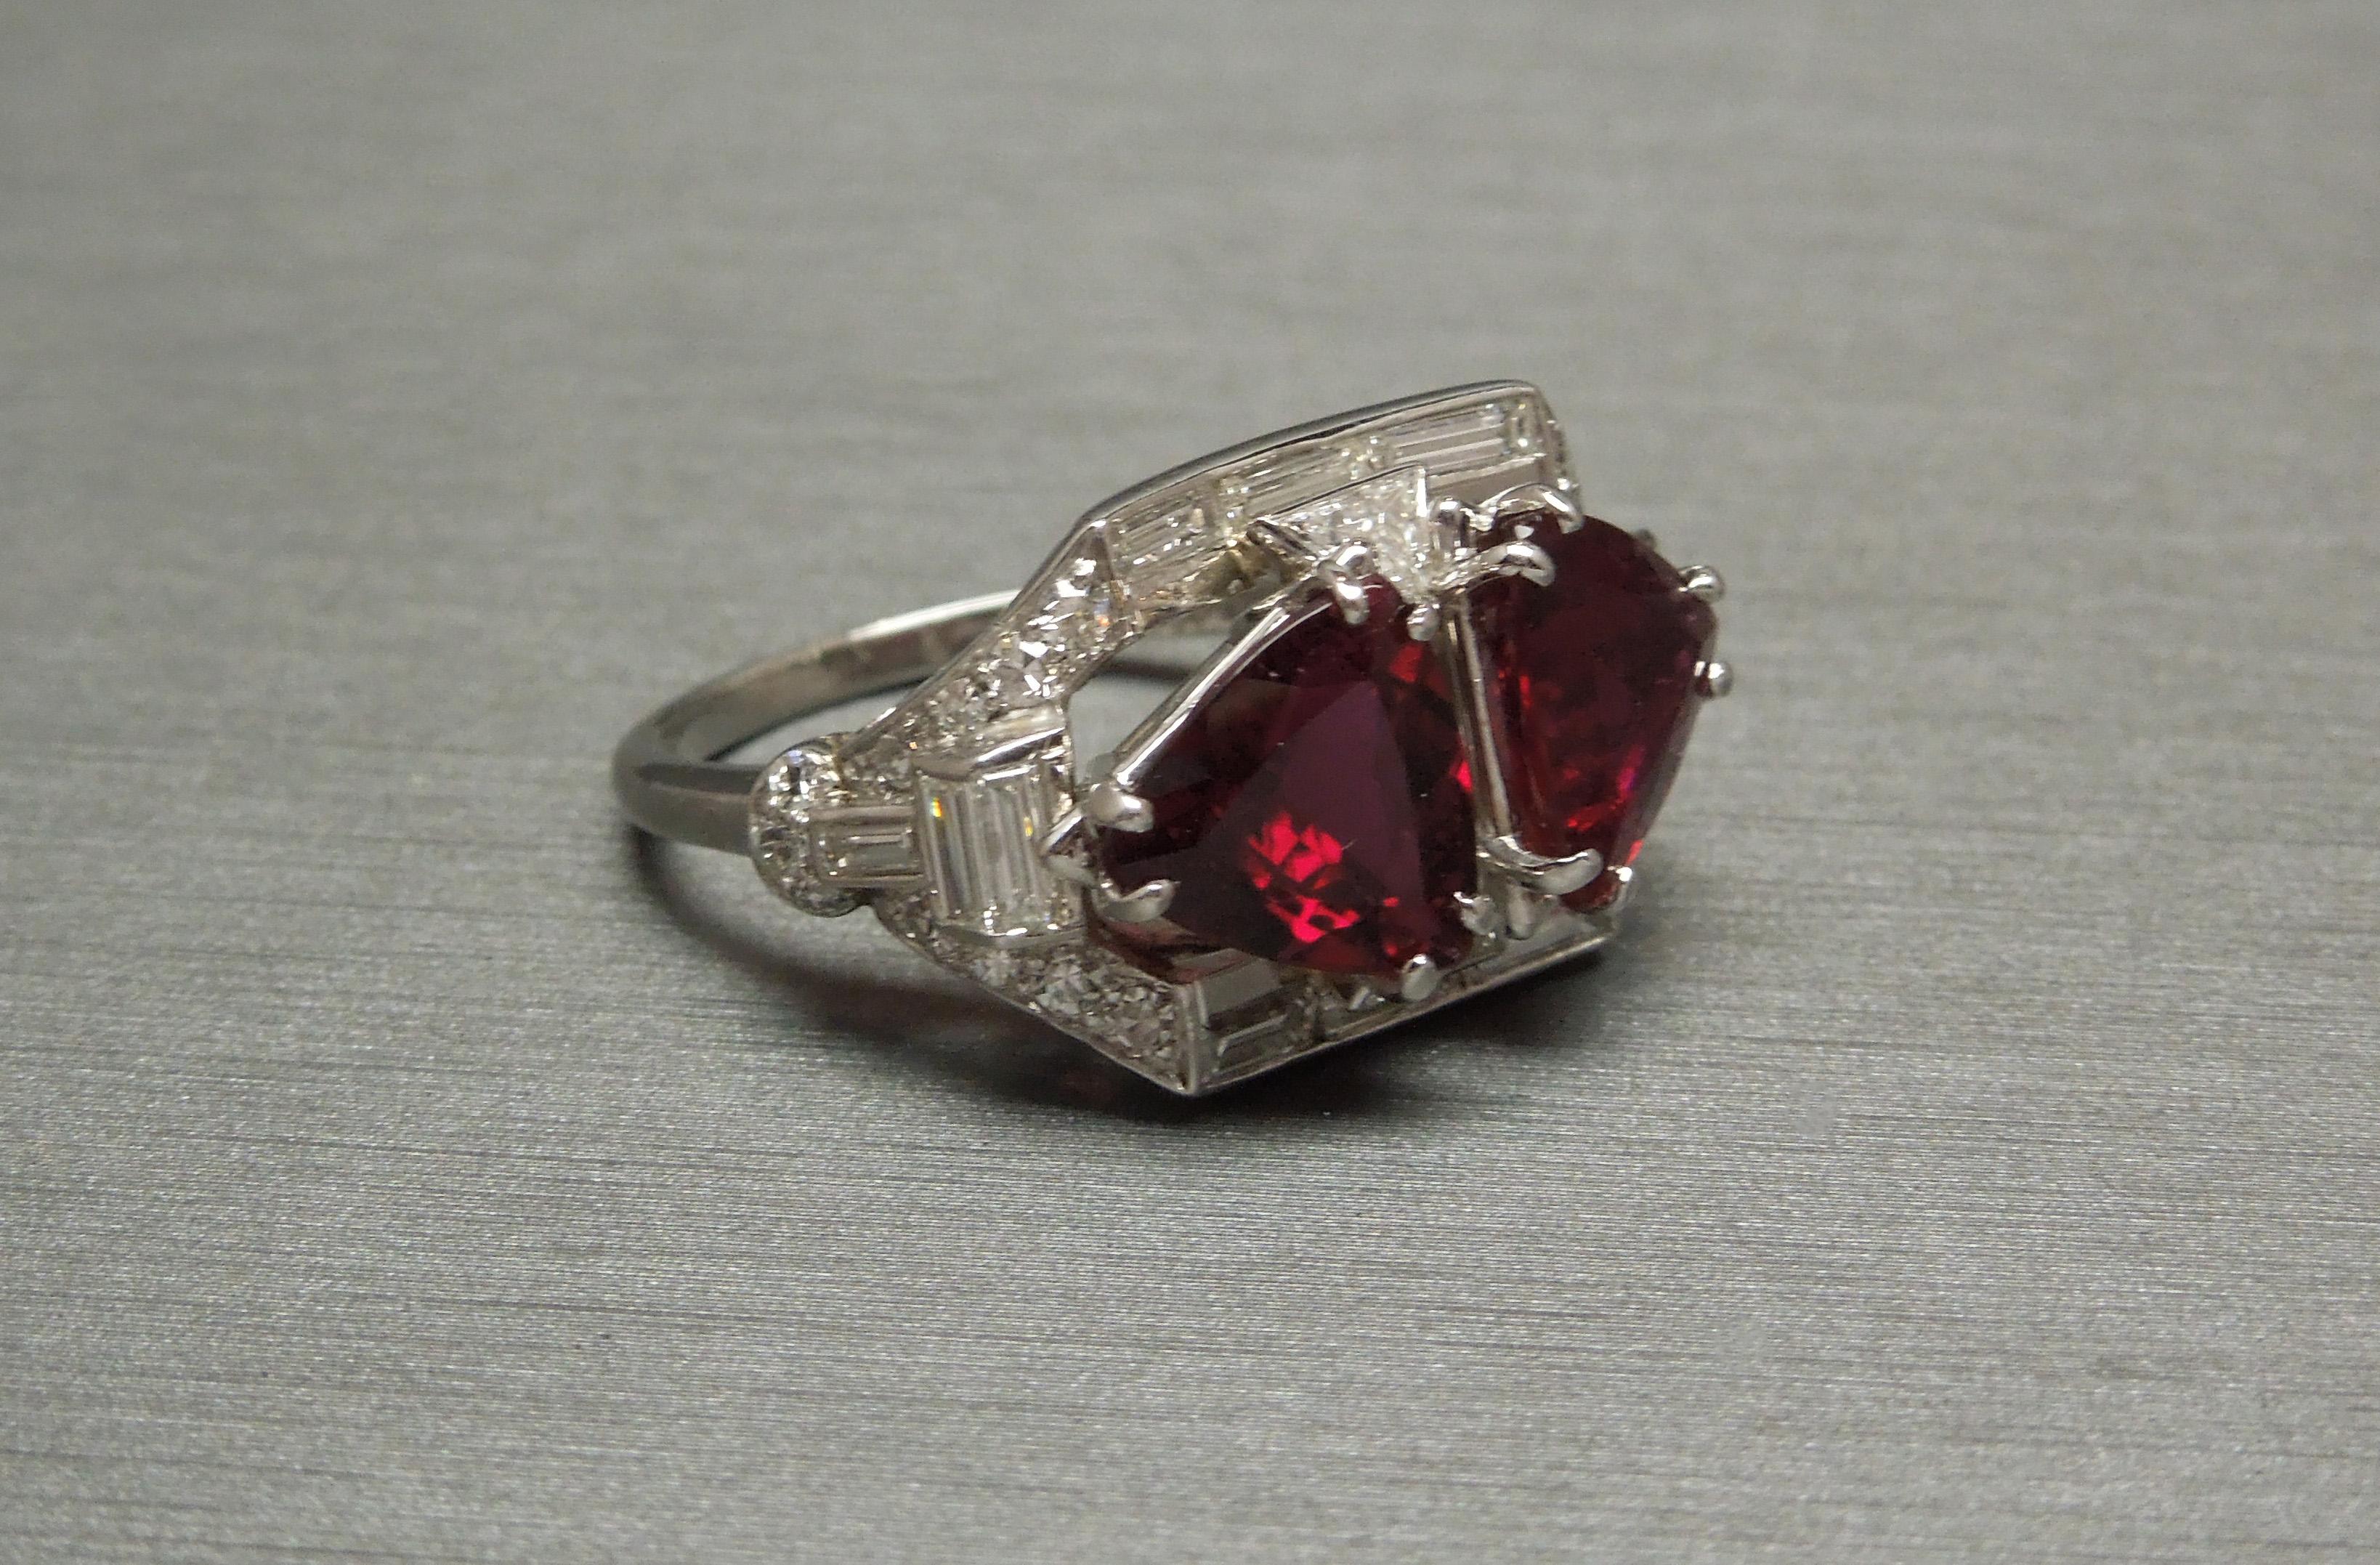 This Platinum Rubellite & Diamond ring features two focal Trillion cut Rubellites, a.k.a. Red Tourmalines totaling 4.12 carats each securely set in three doubled prongs. With a total of 2.50 carats of Diamonds consisting of Colorless Nearly Flawless